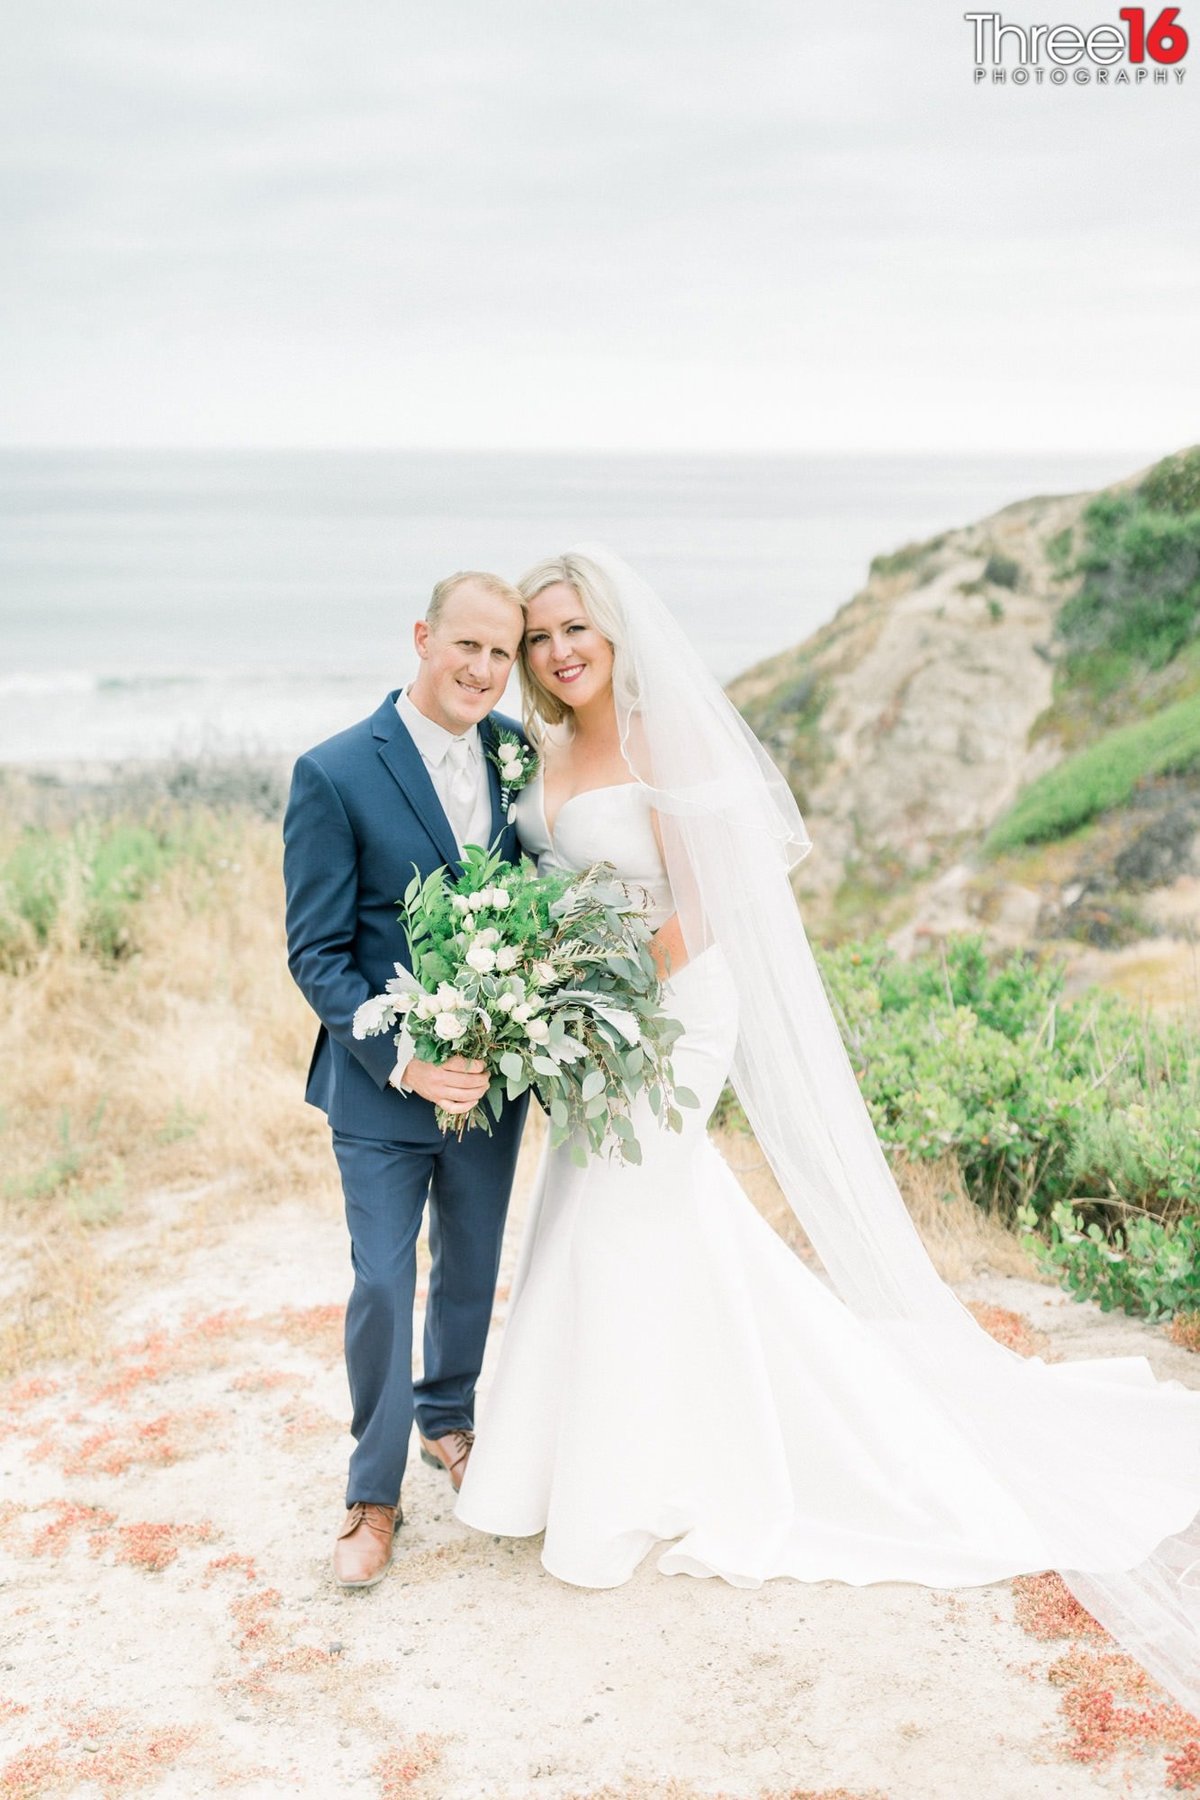 Bride and Groom pose for photos on the beach leading to the ocean in San Clemente, CA